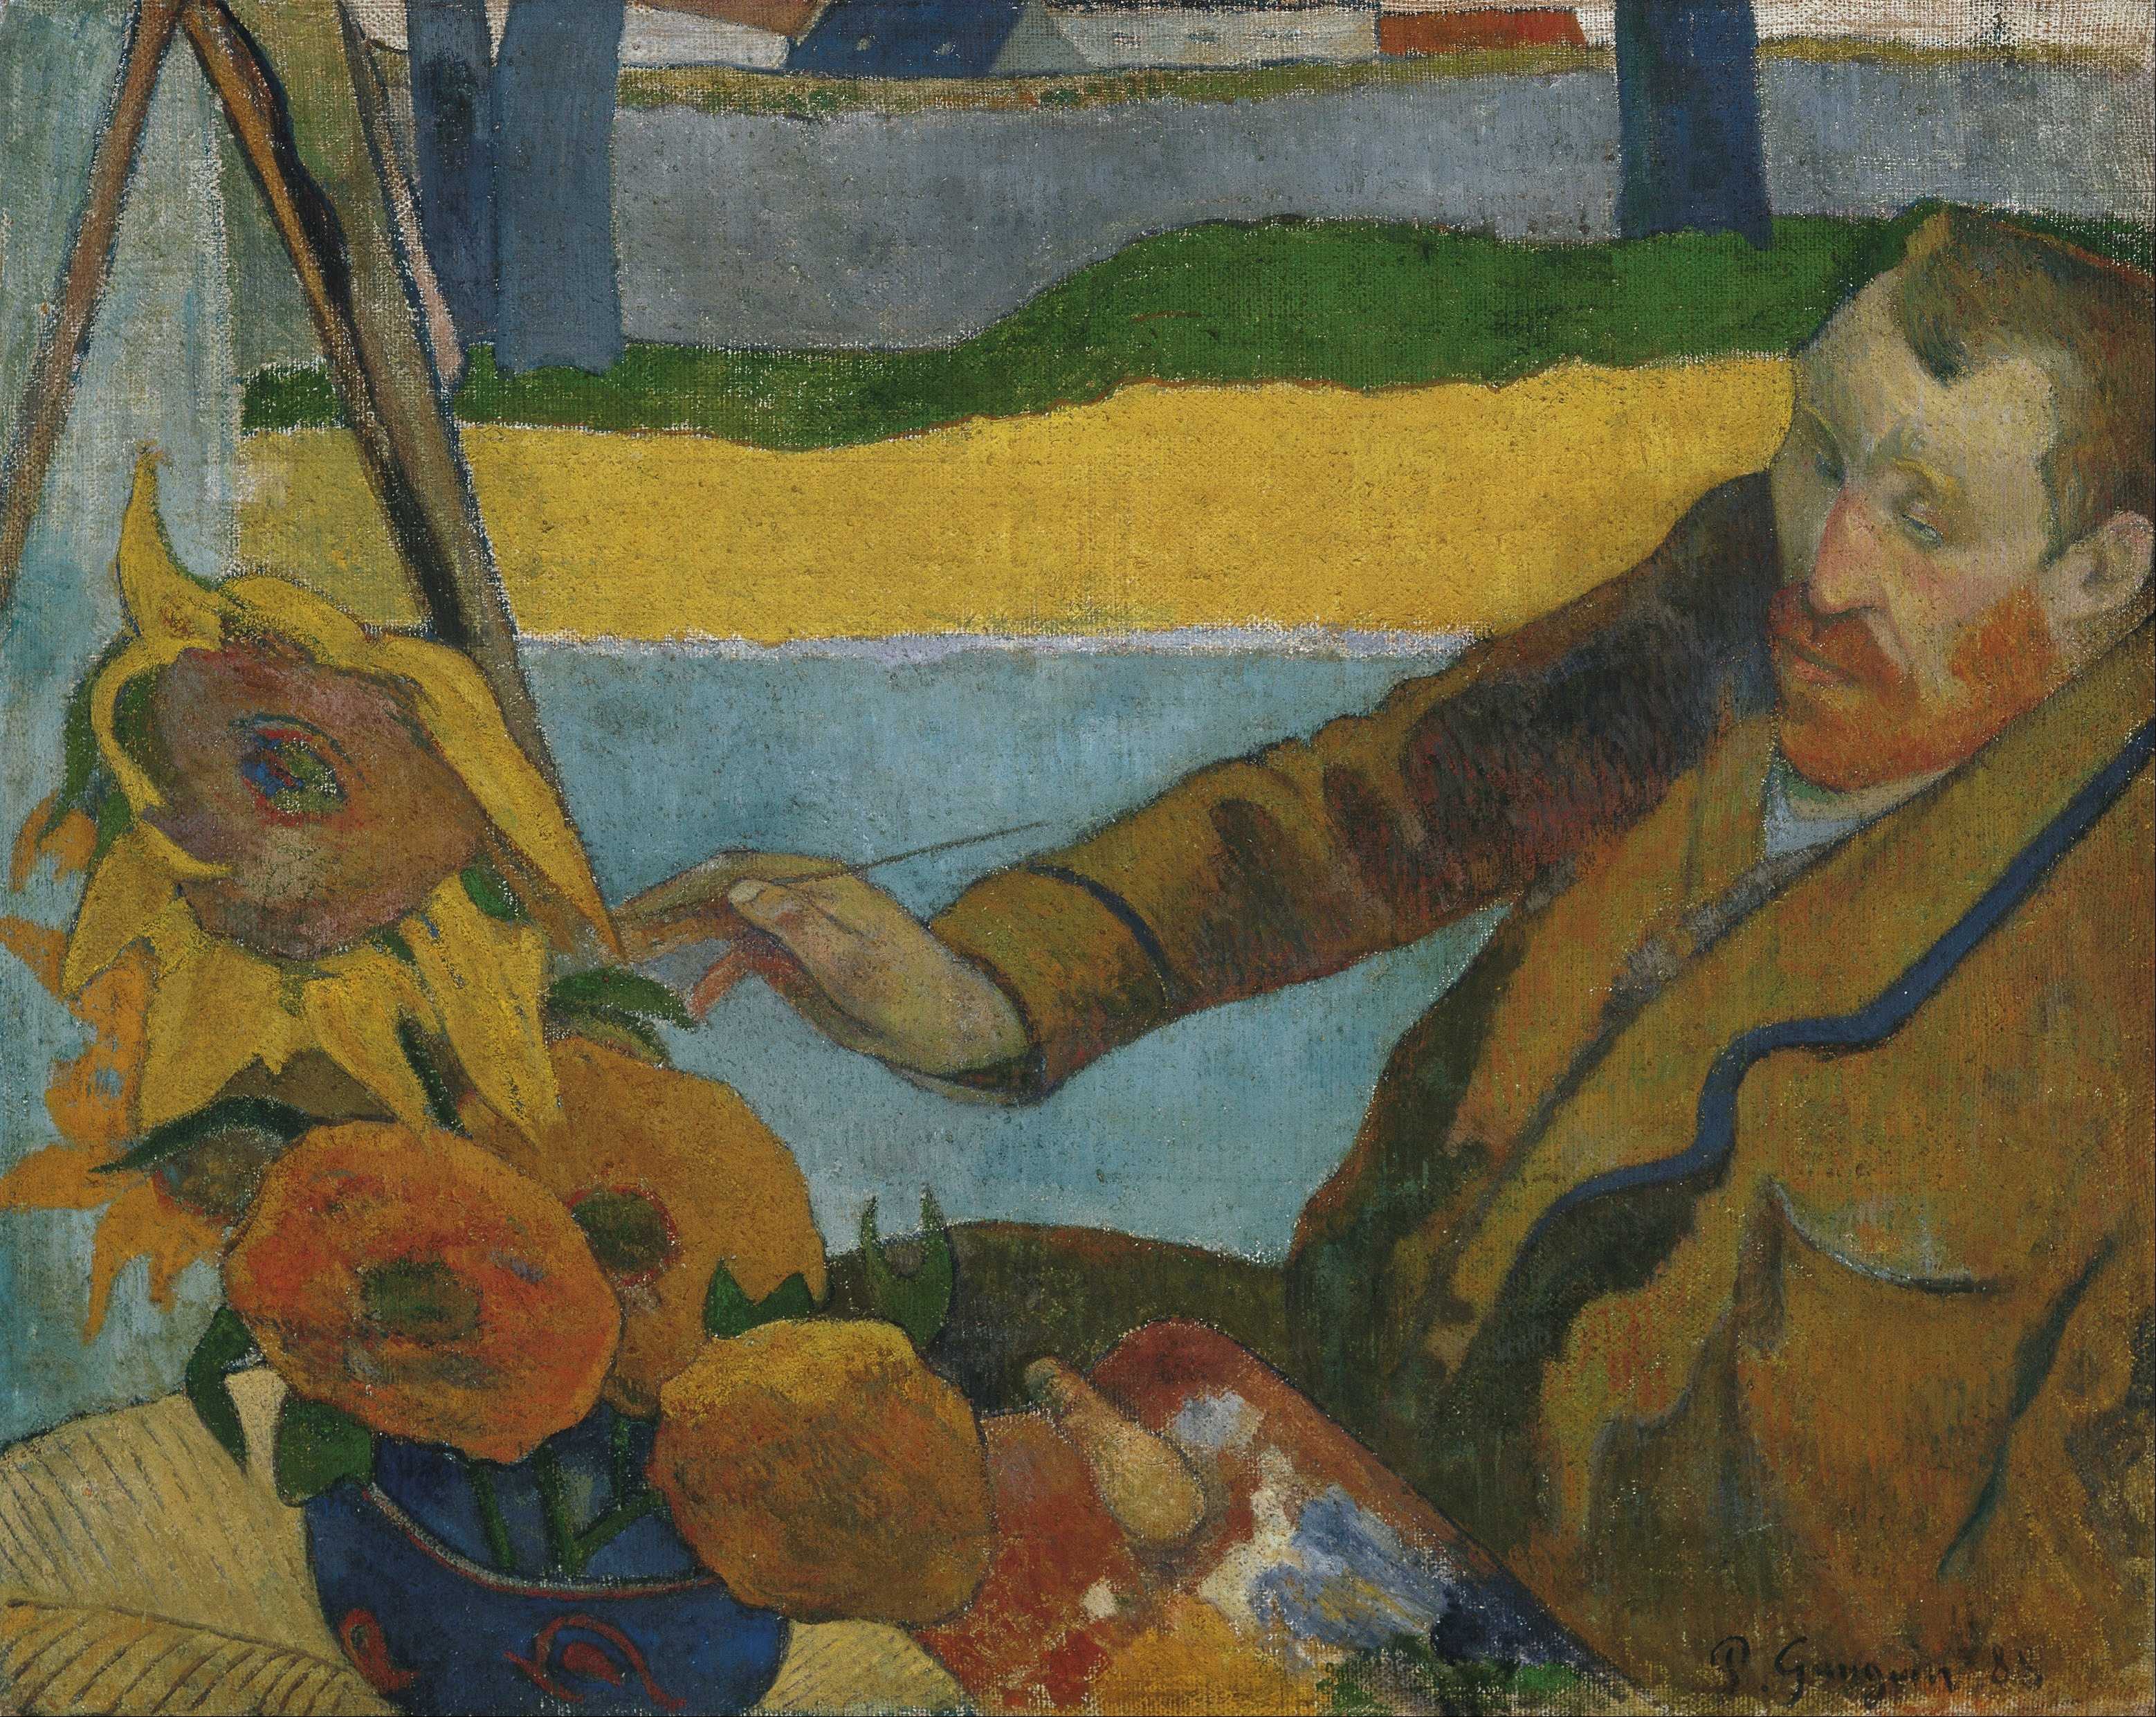 Find out more about Paul Gauguin - Vincent Van Gogh Painting Sunflowers